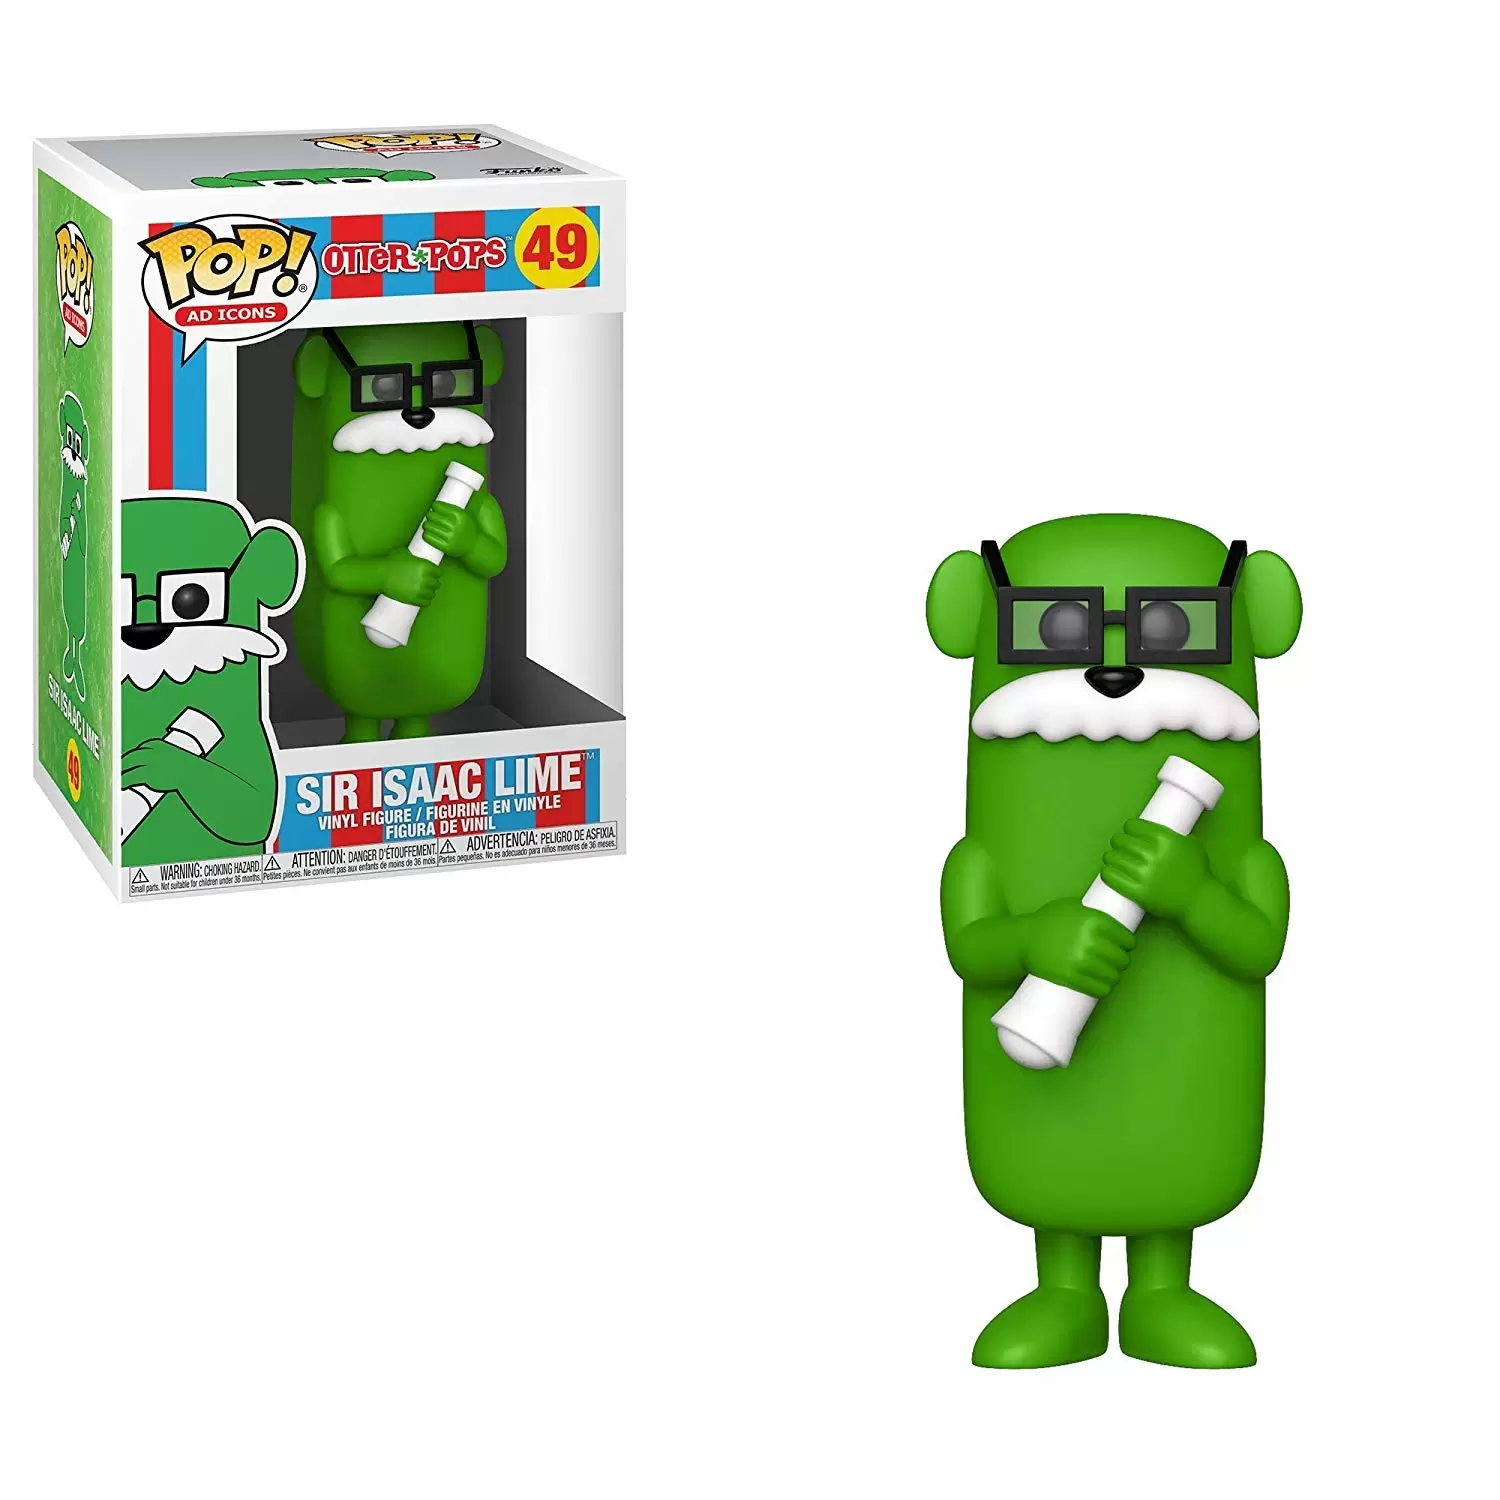 POP! Ad Icons - Otter Pops - Sir Isaac Lime